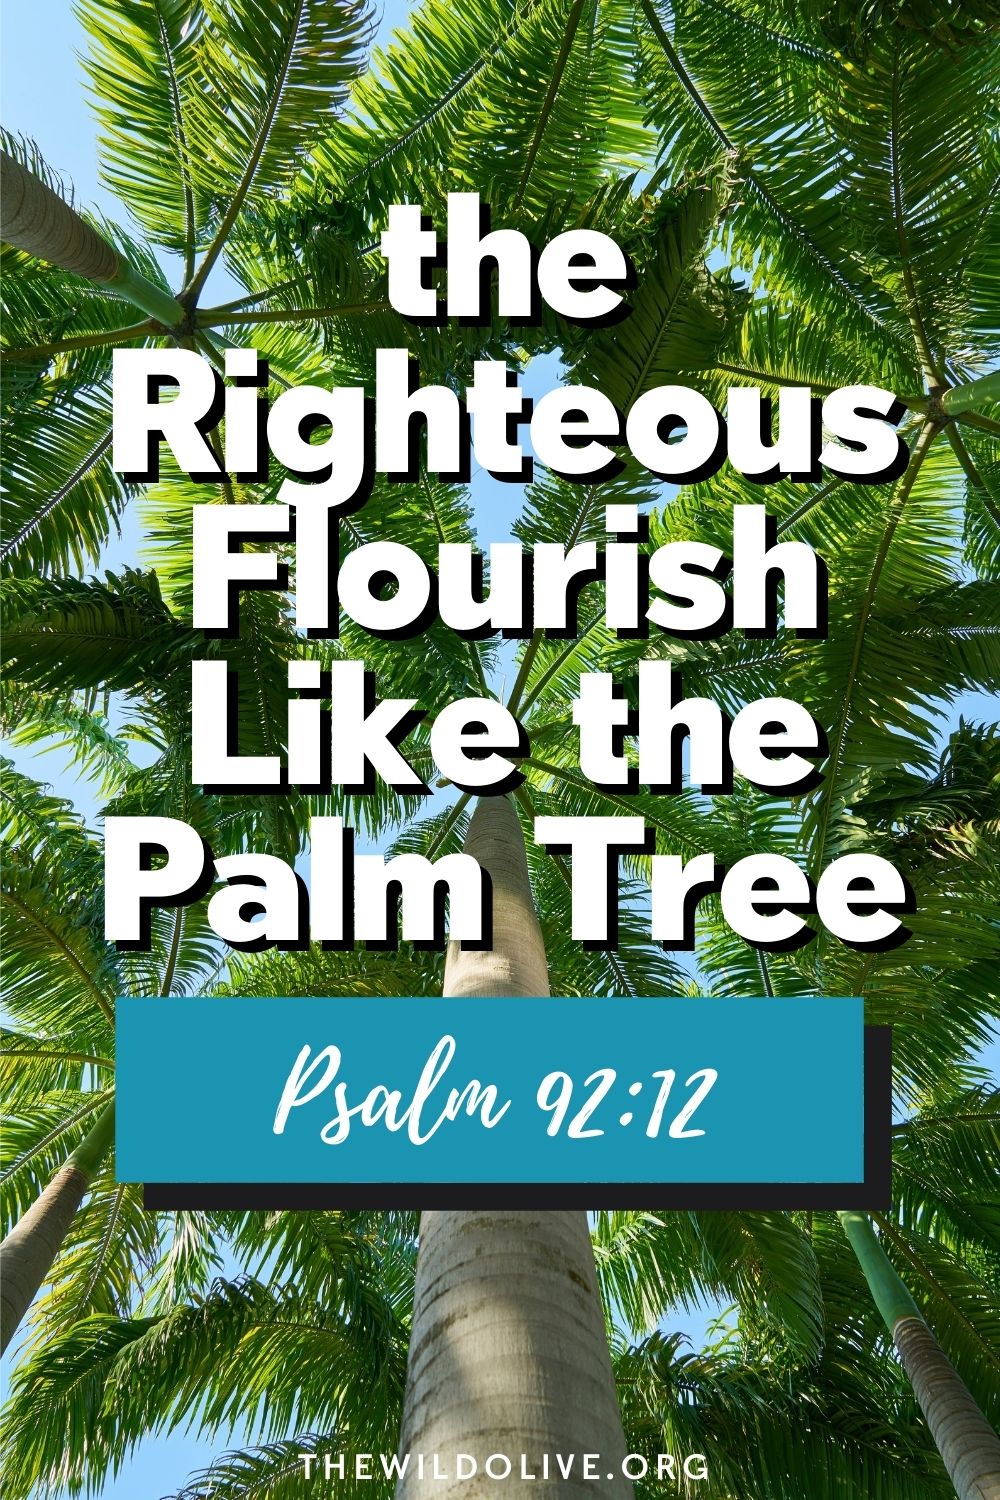 Pinnable Image for Article on Ps 92:12 - the righteous flourish like the palm tree